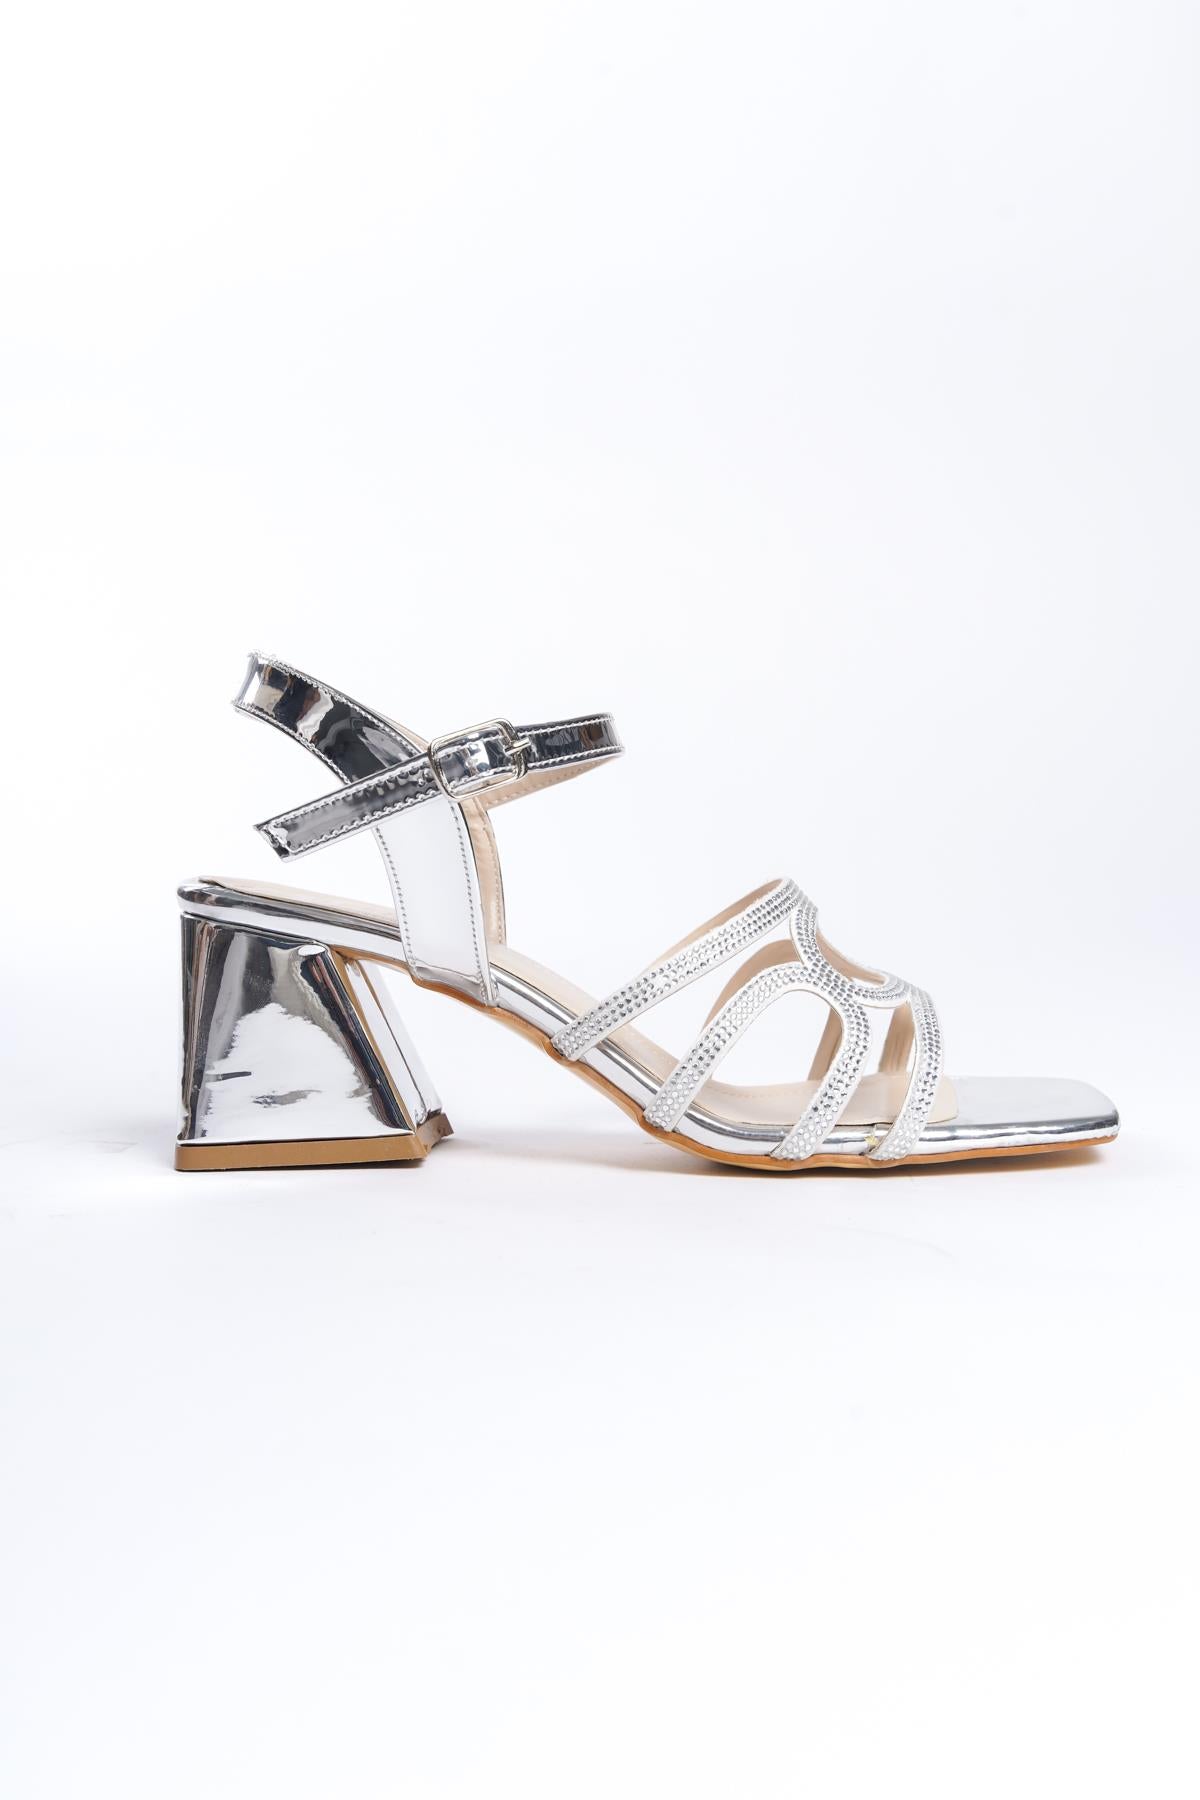 Women's Pedm Silver Low Thick Heel Stone Sandals 5 cm - STREETMODE™